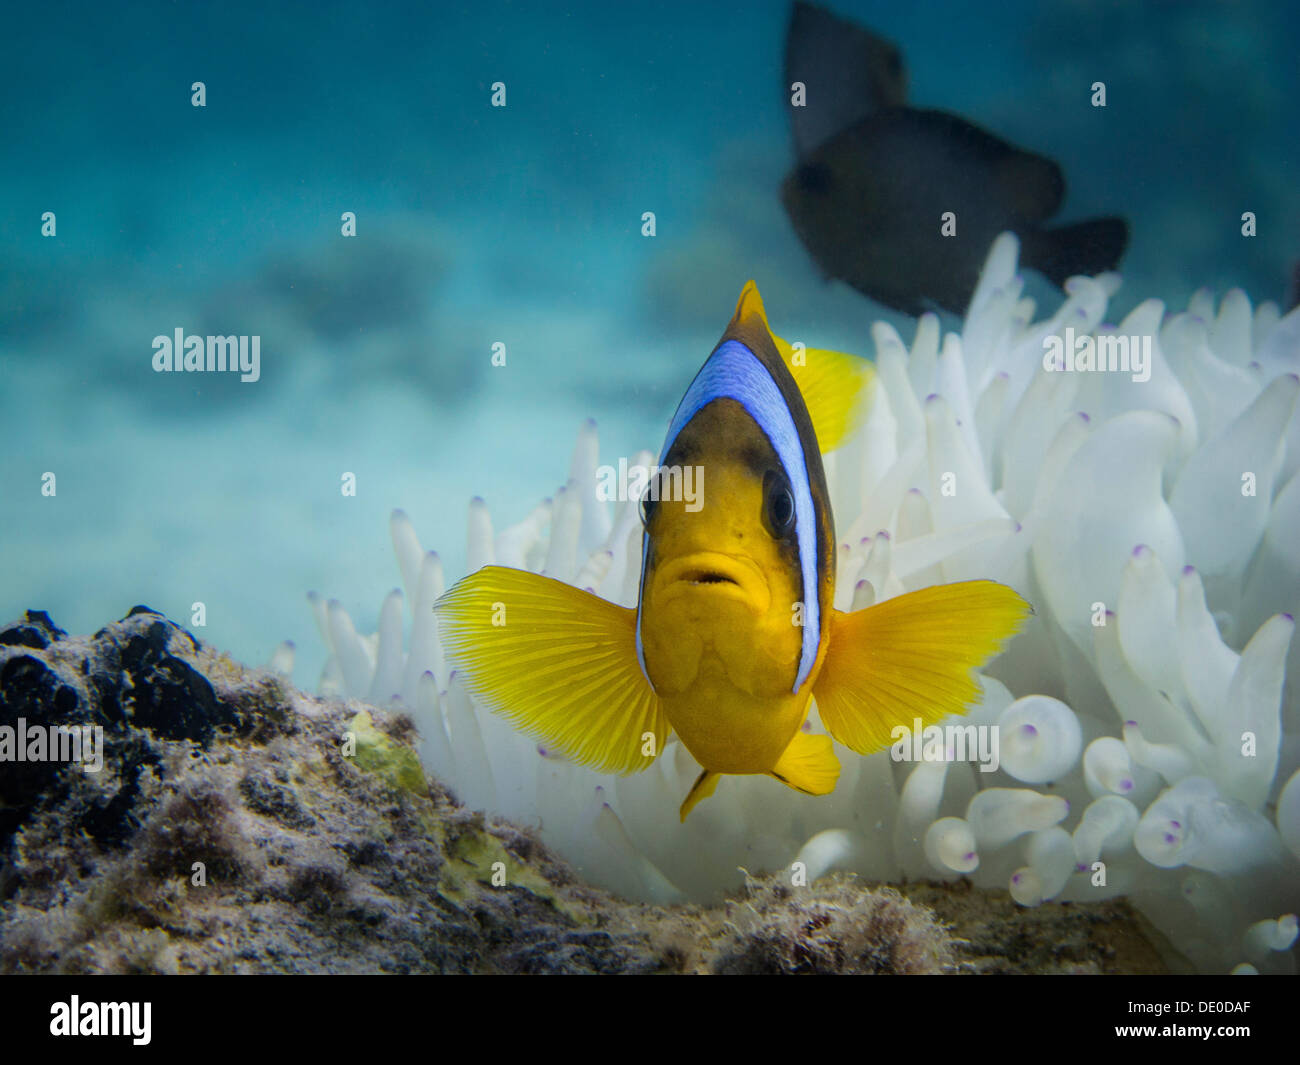 Red Sea Clownfish or Twoband Anemonefish (Amphiprion bicinctus), Mangrove Bay, Red Sea, Egypt, Africa Stock Photo